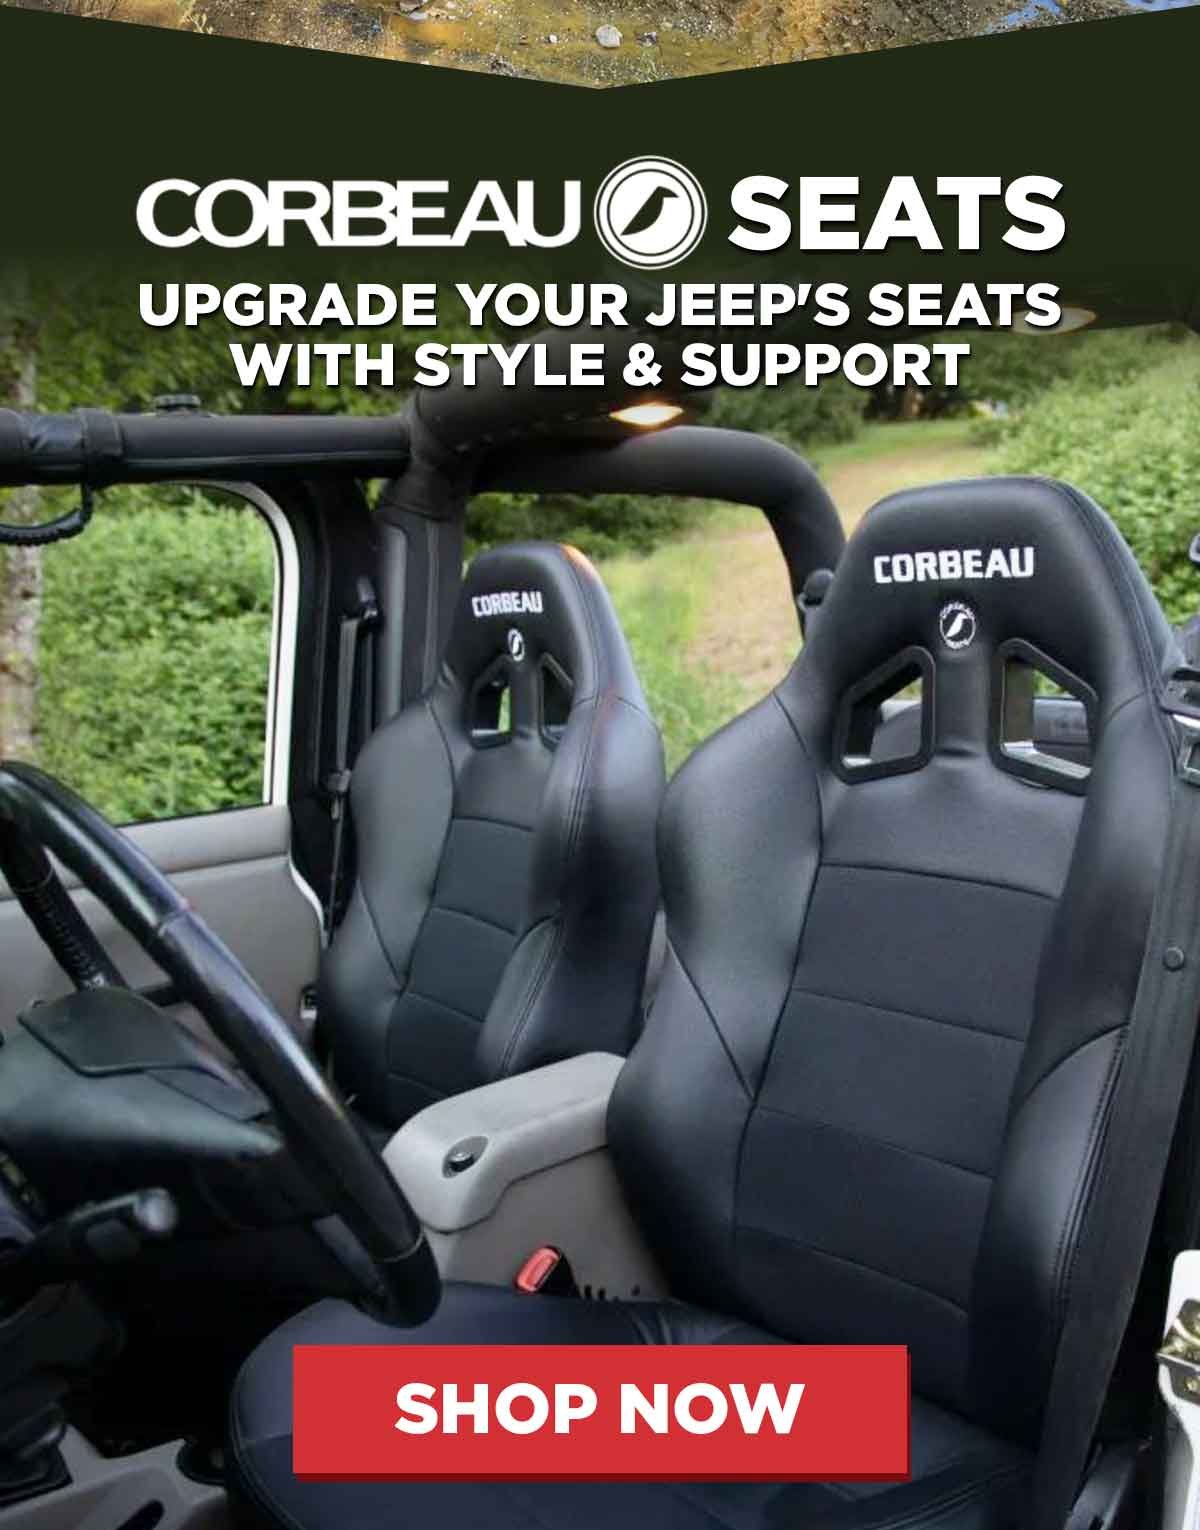 Corbeau Seats - Upgrade Your Jeep's Seats with Style & Support